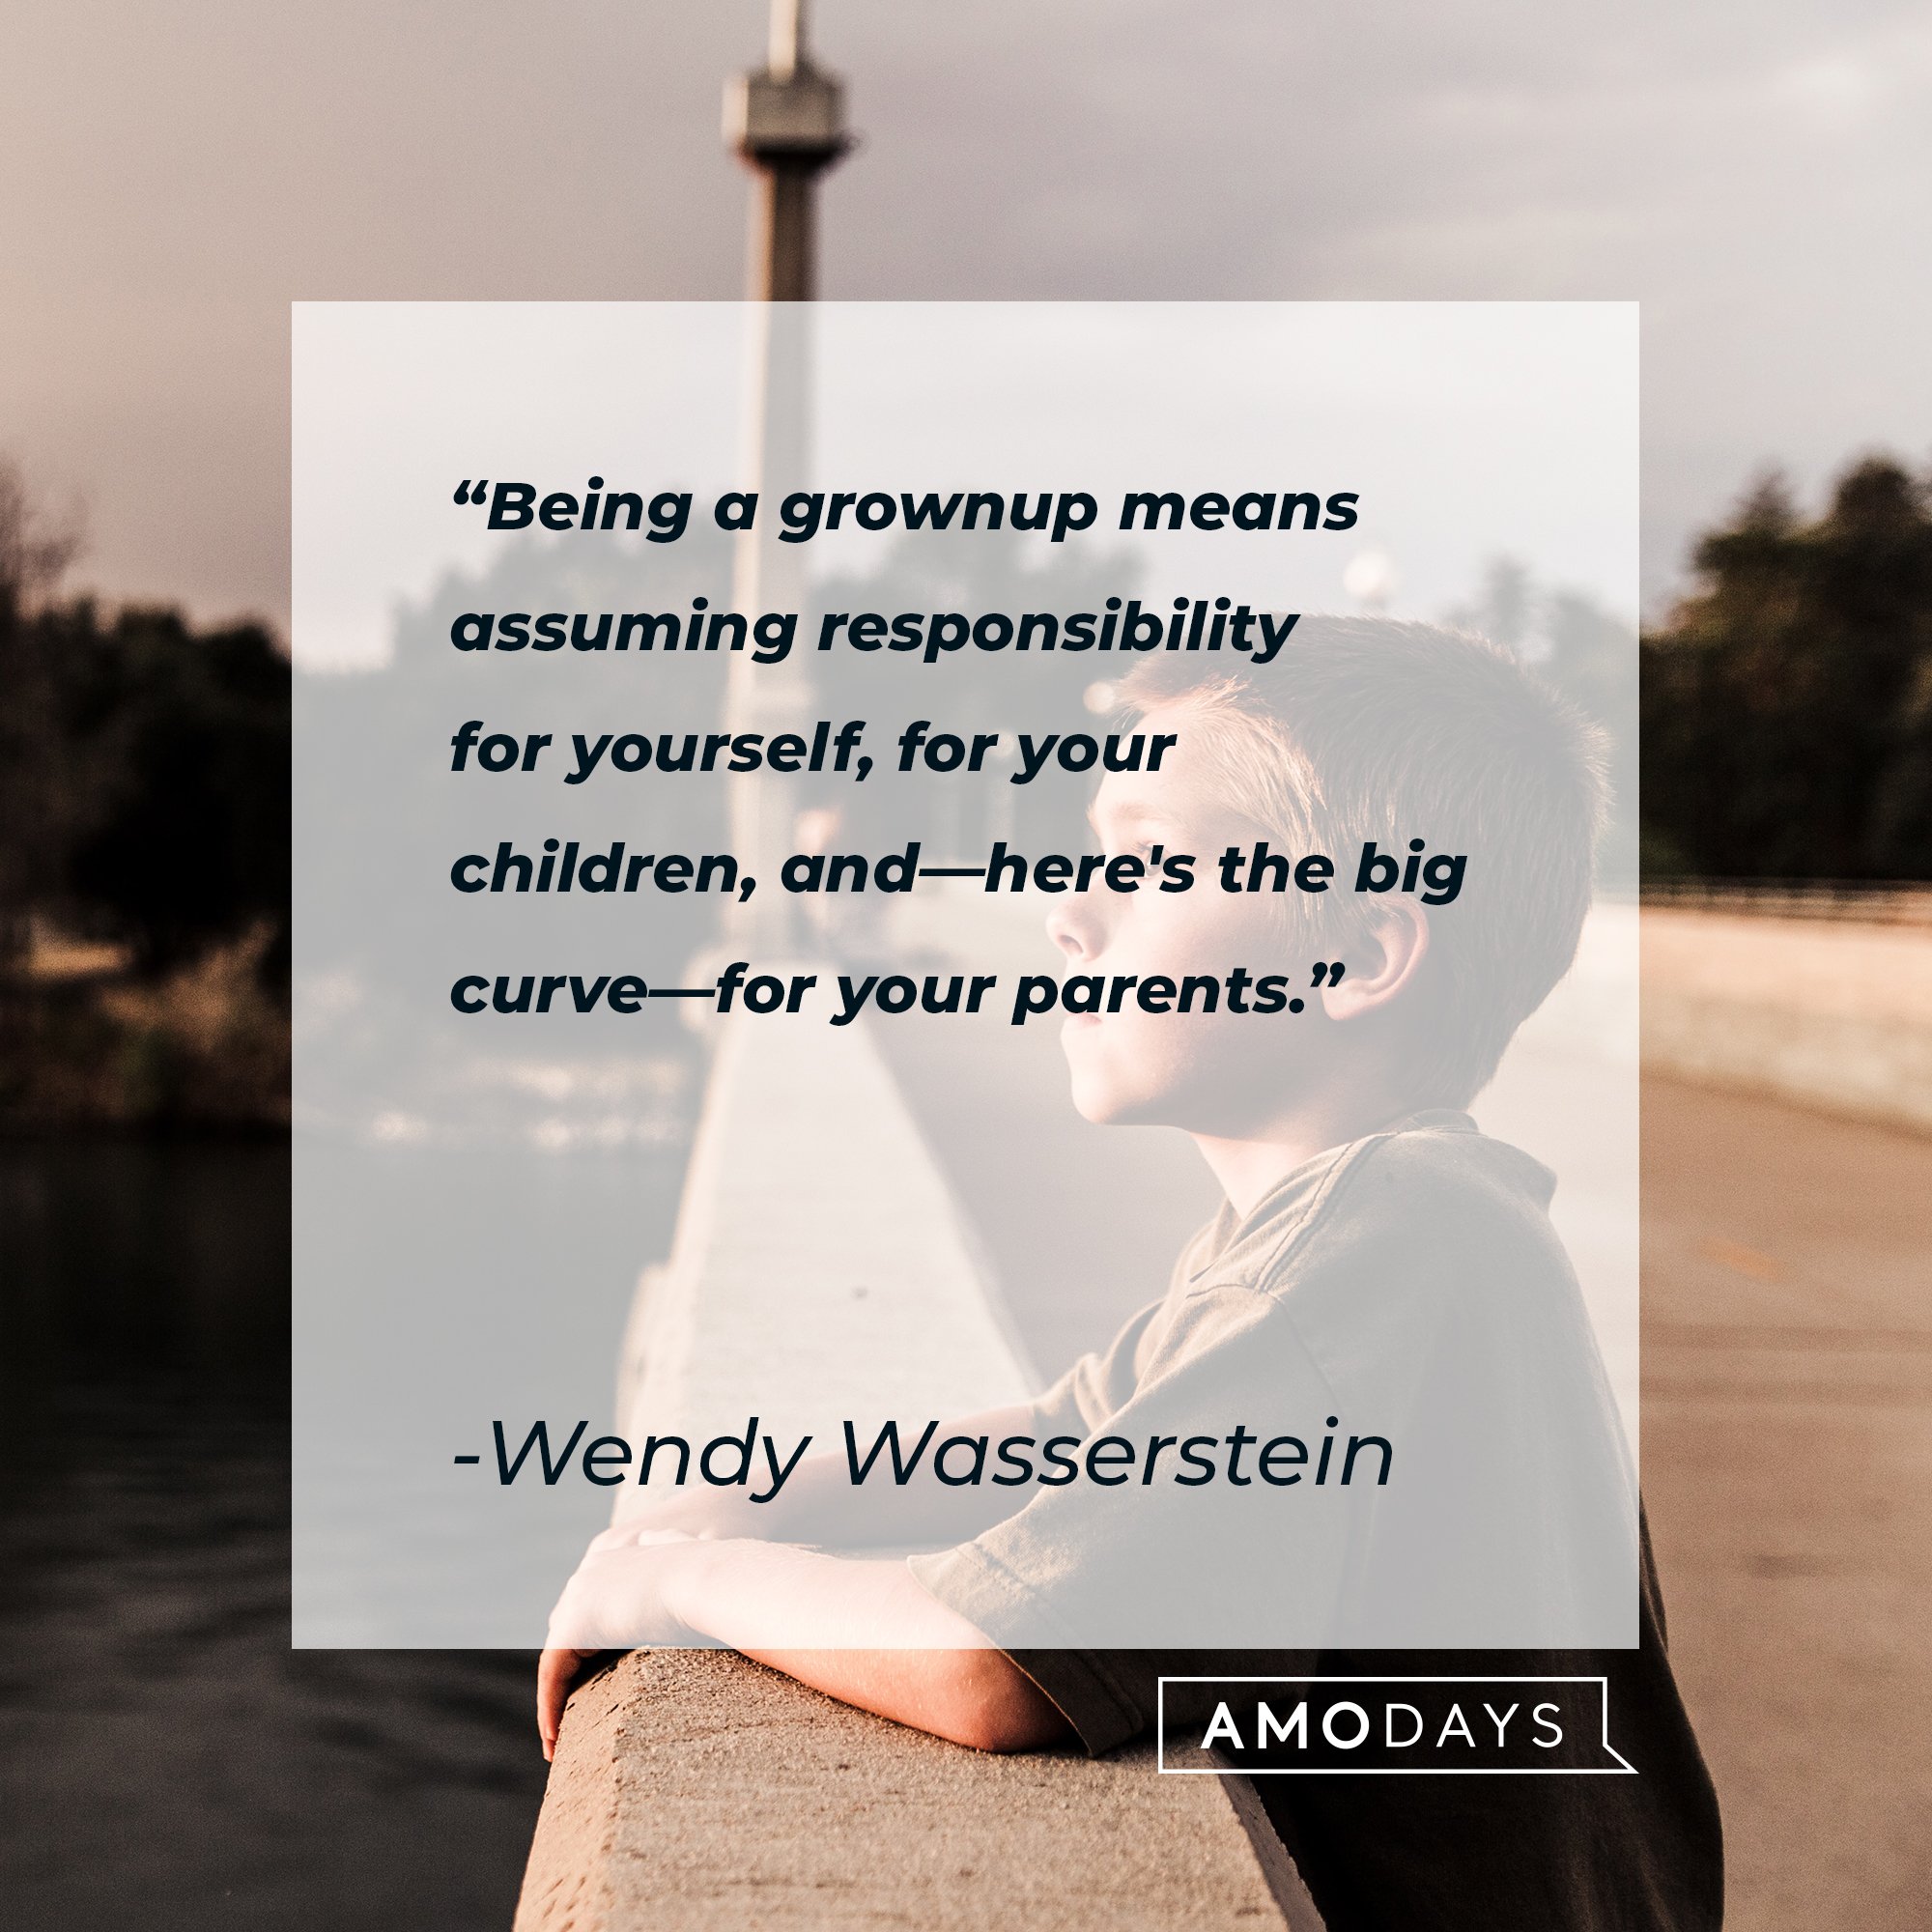 Wendy Wasserstein’s quote: "Being a grownup means assuming responsibility for yourself, for your children, and—here's the big curve—for your parents." | Image: AmoDays 